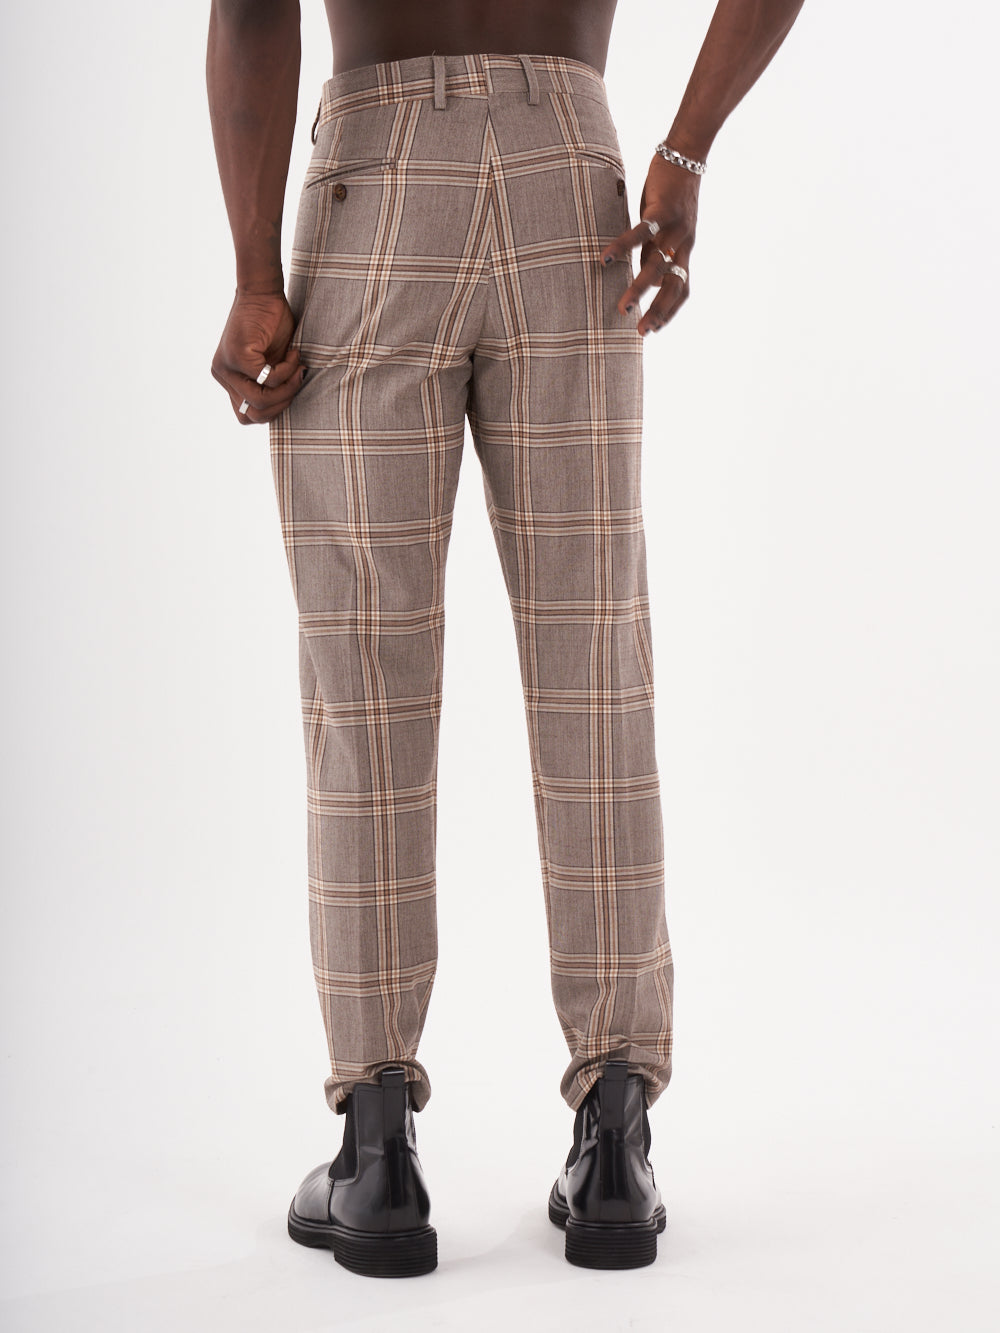 A man wearing [ROOK PANTS] in a brown and tan slim-fit checkered trouser.